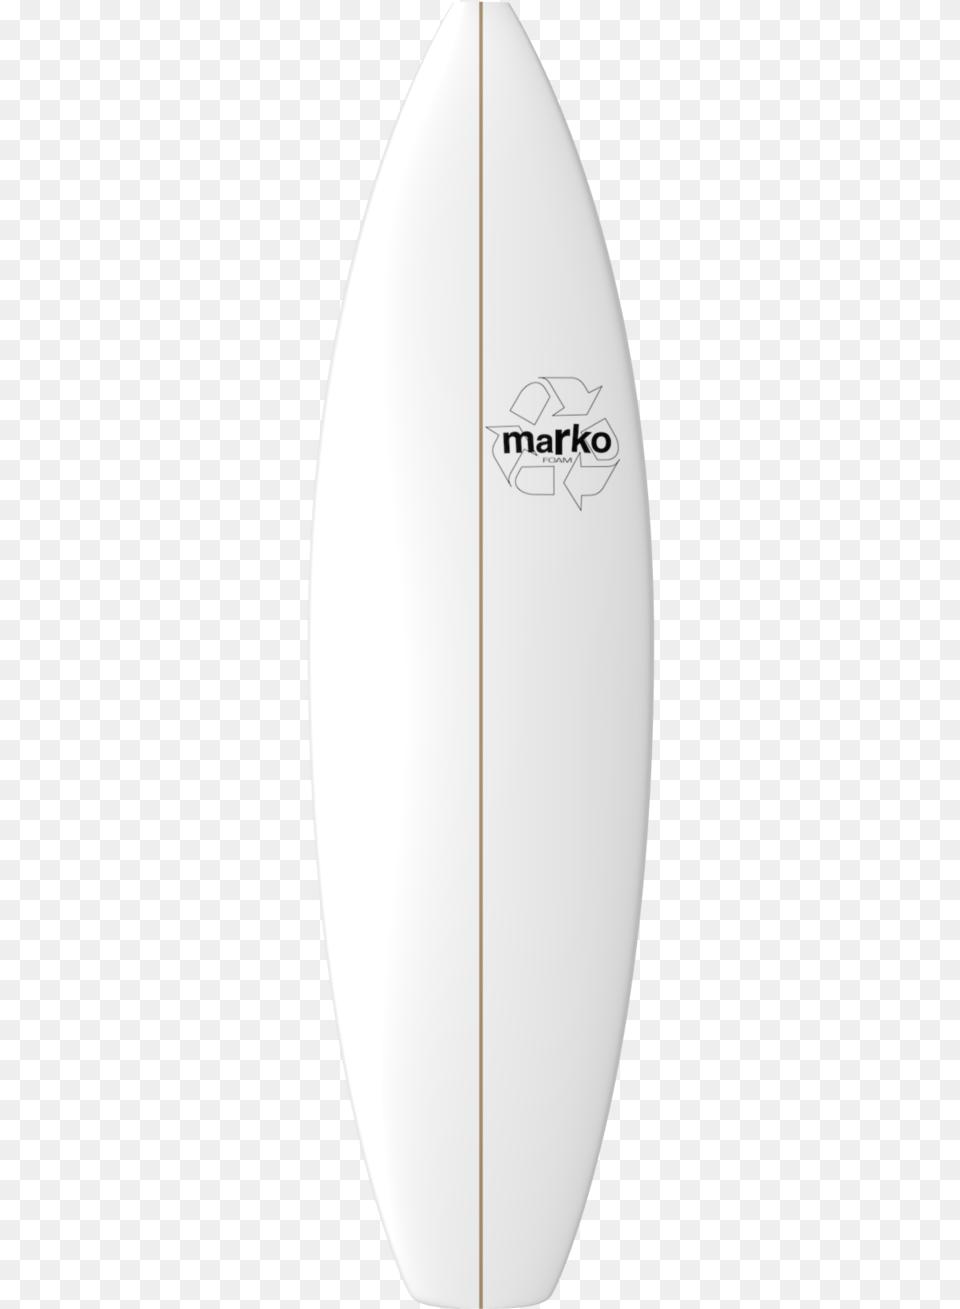 H New Surfboard, Leisure Activities, Nature, Outdoors, Sea Free Transparent Png